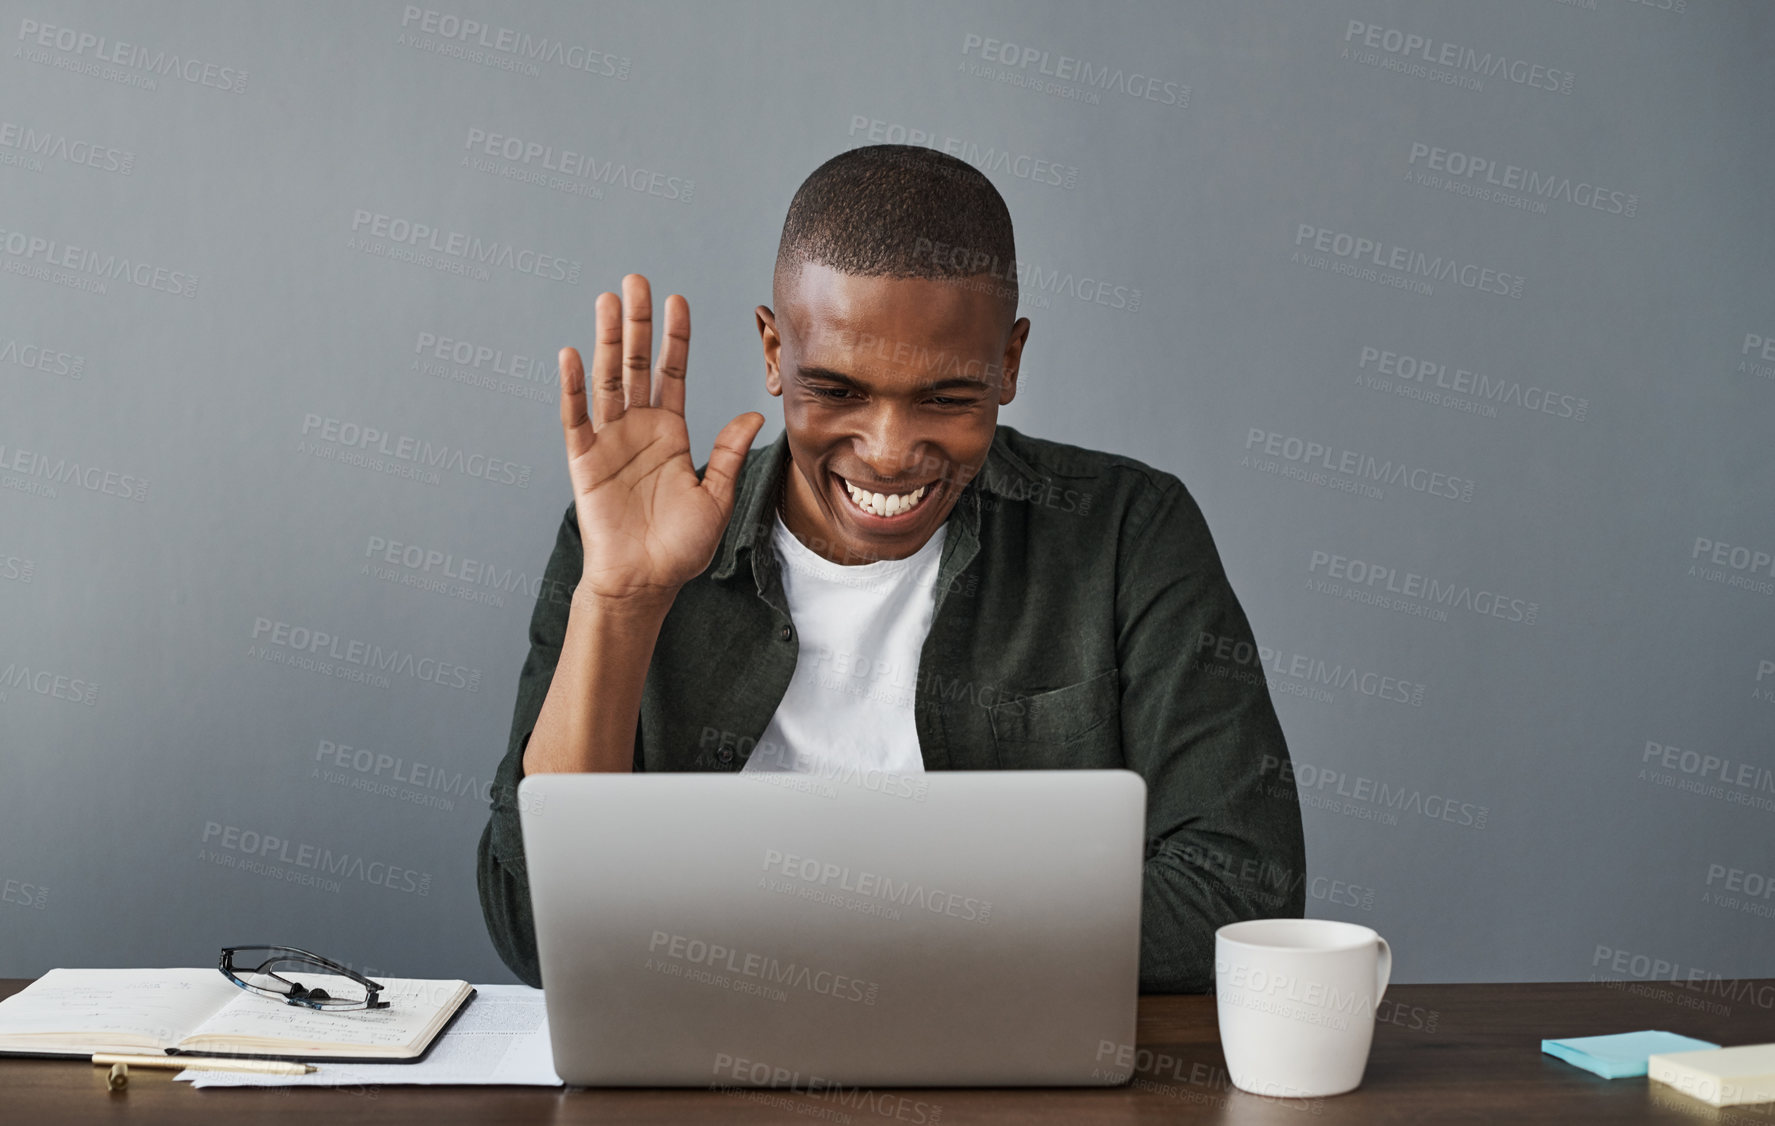 Buy stock photo Shot of a young businessman working from home and using his laptop to make a video call